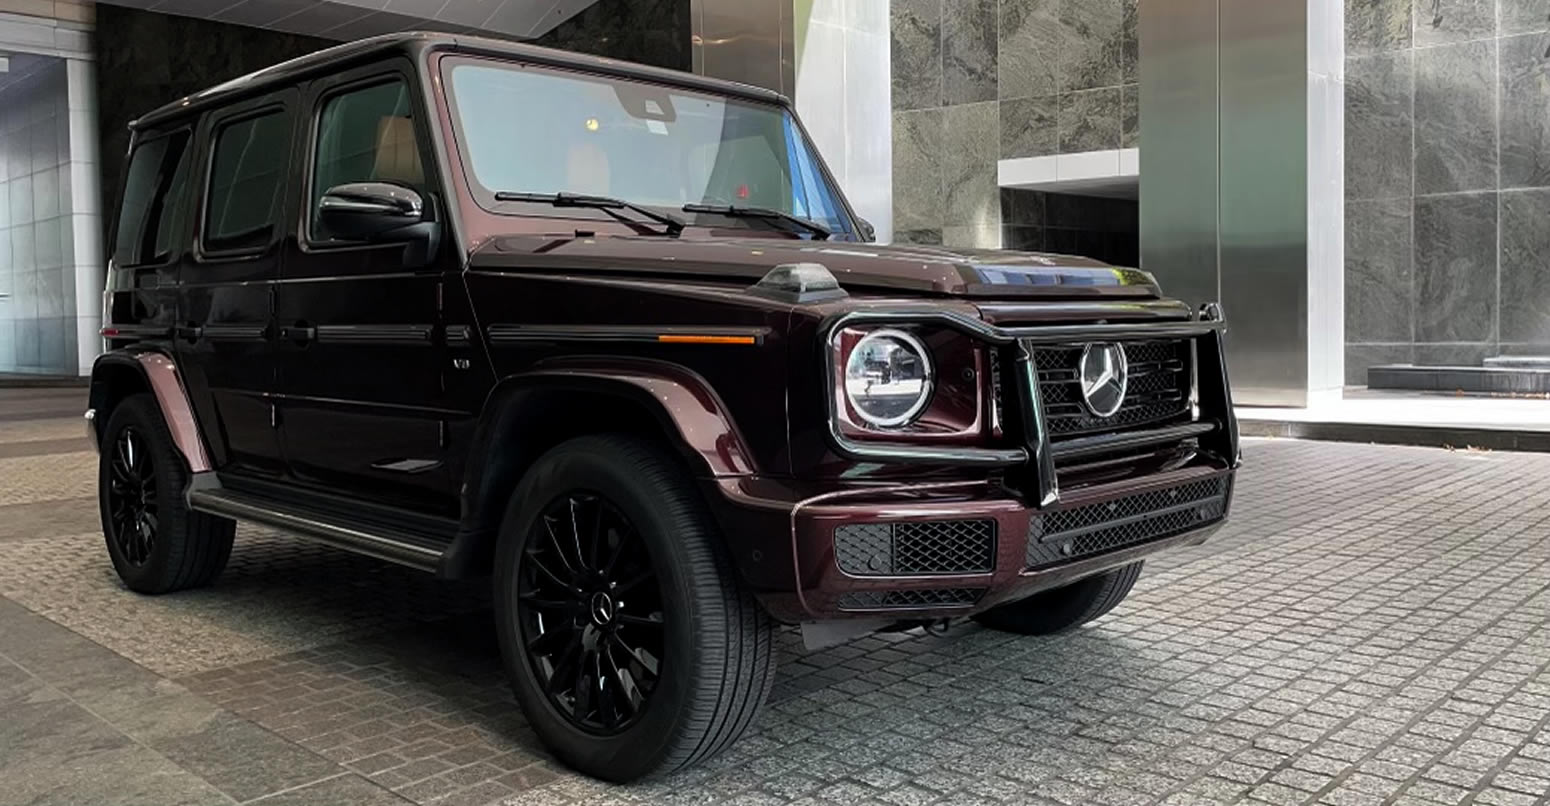 HIRE MERCEDES BENZ AMG G550 - BOOKING IN HOUSTON